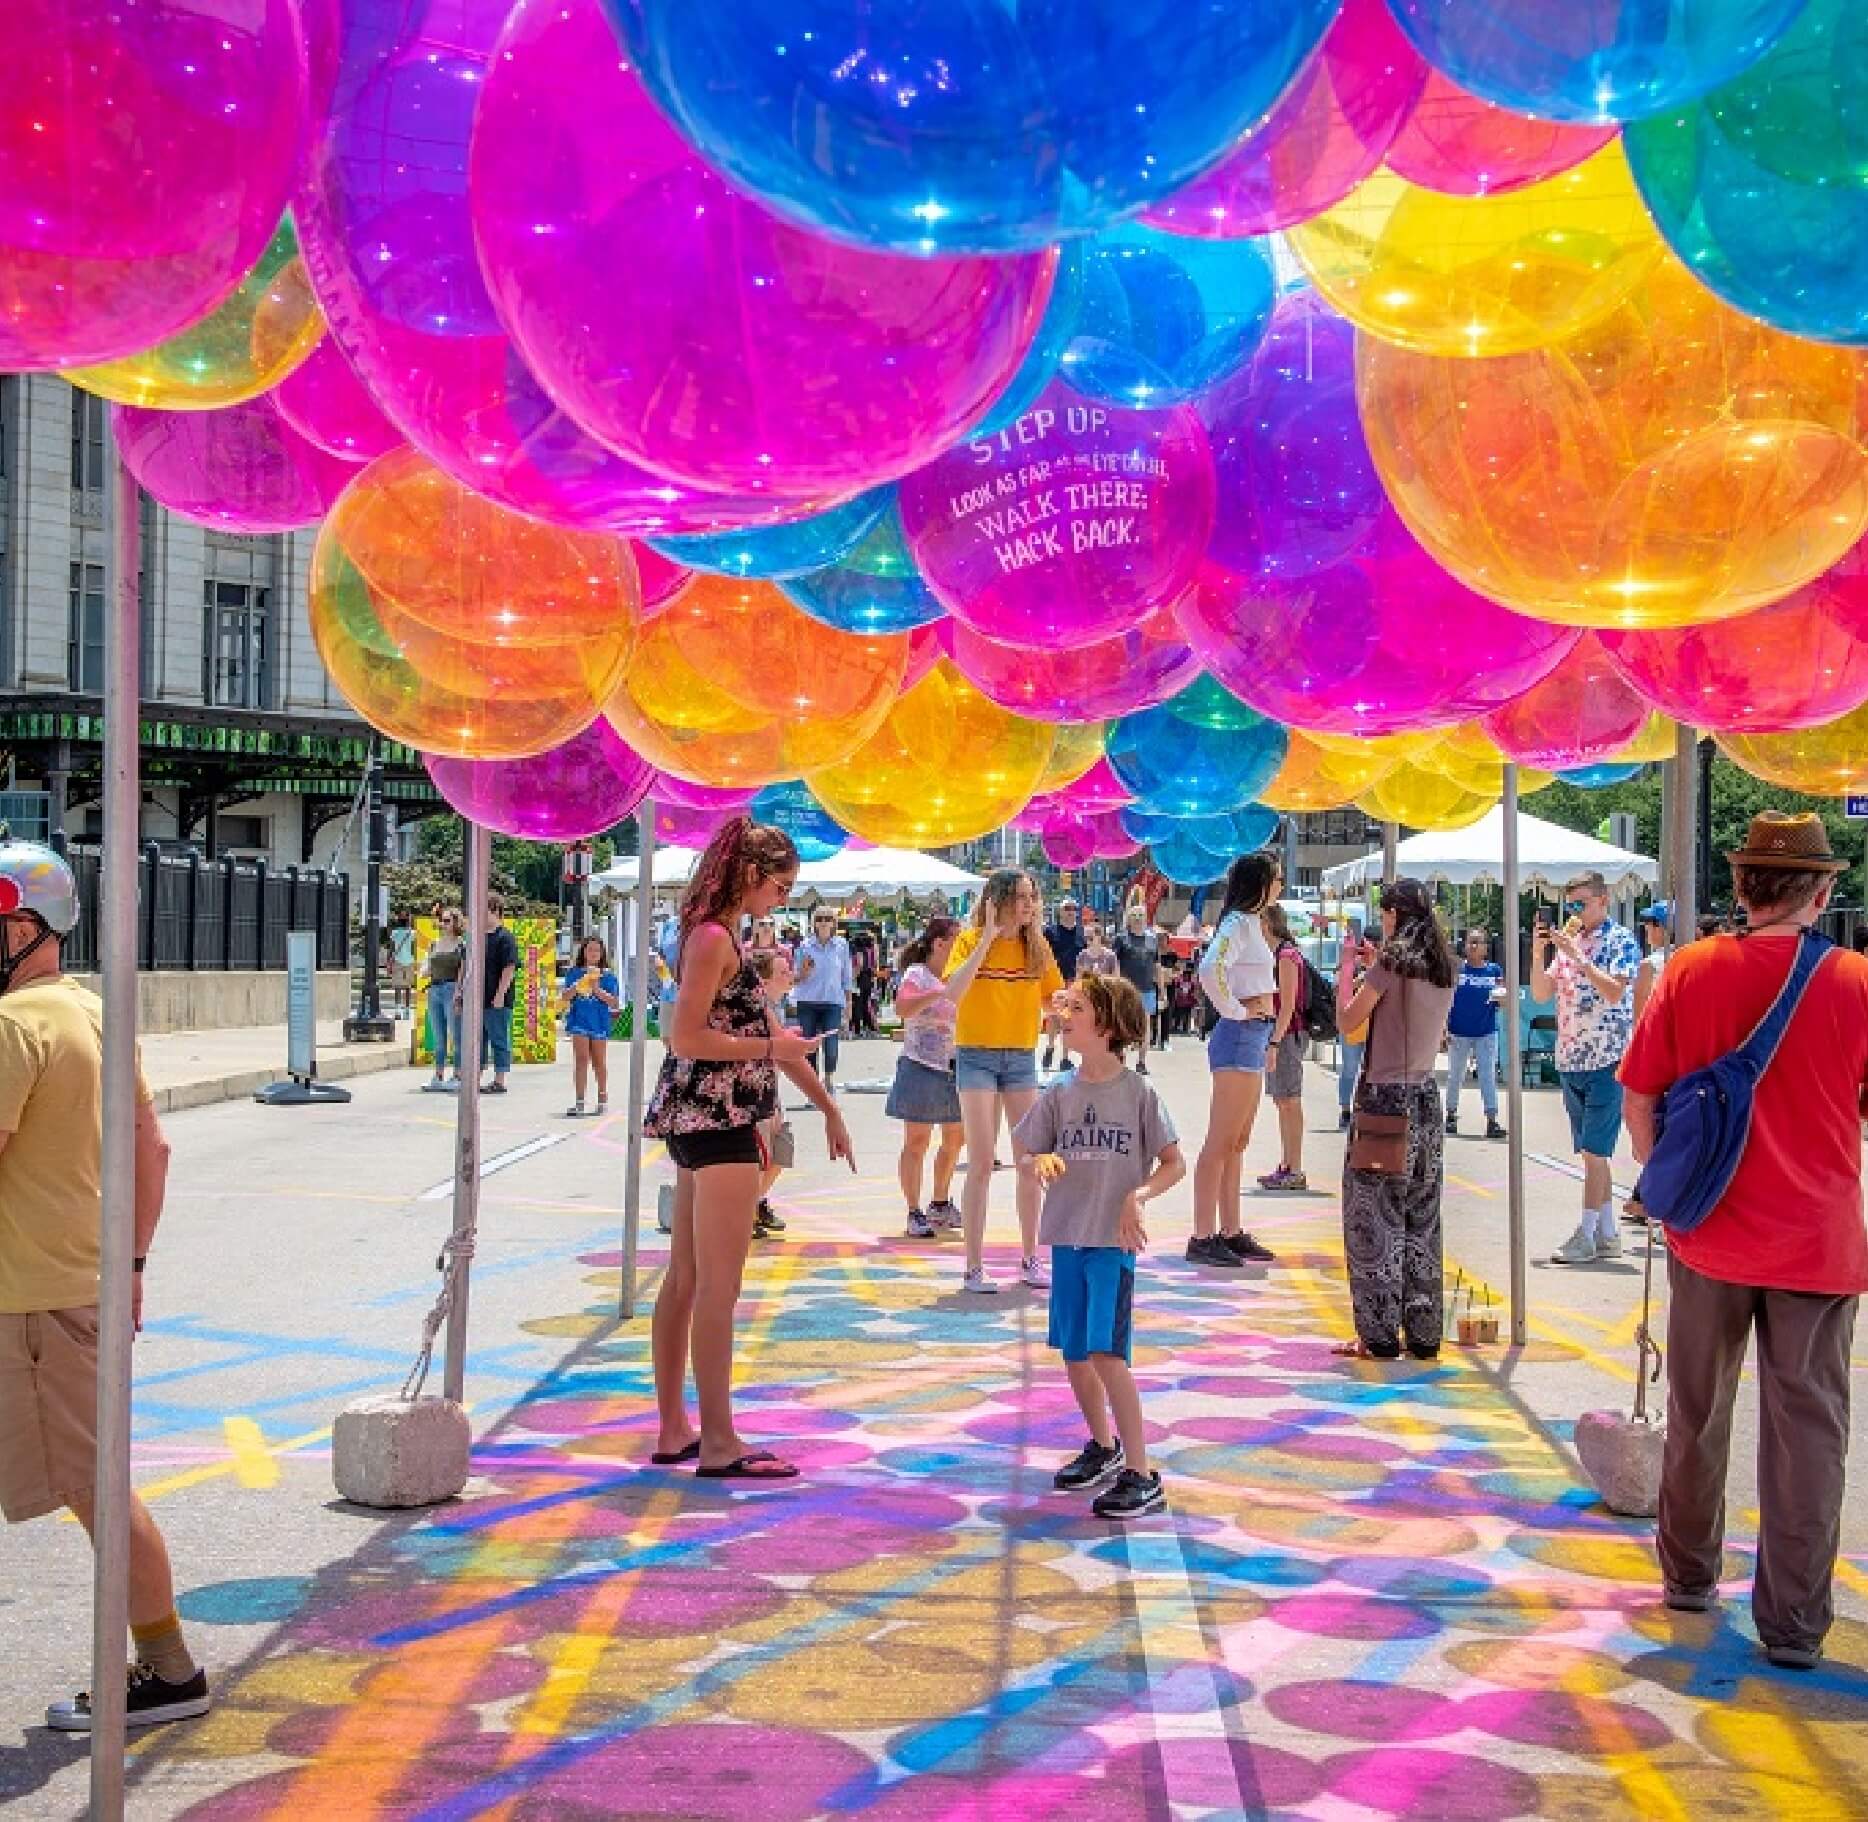 Colorful balloons at an Artscape exhibit